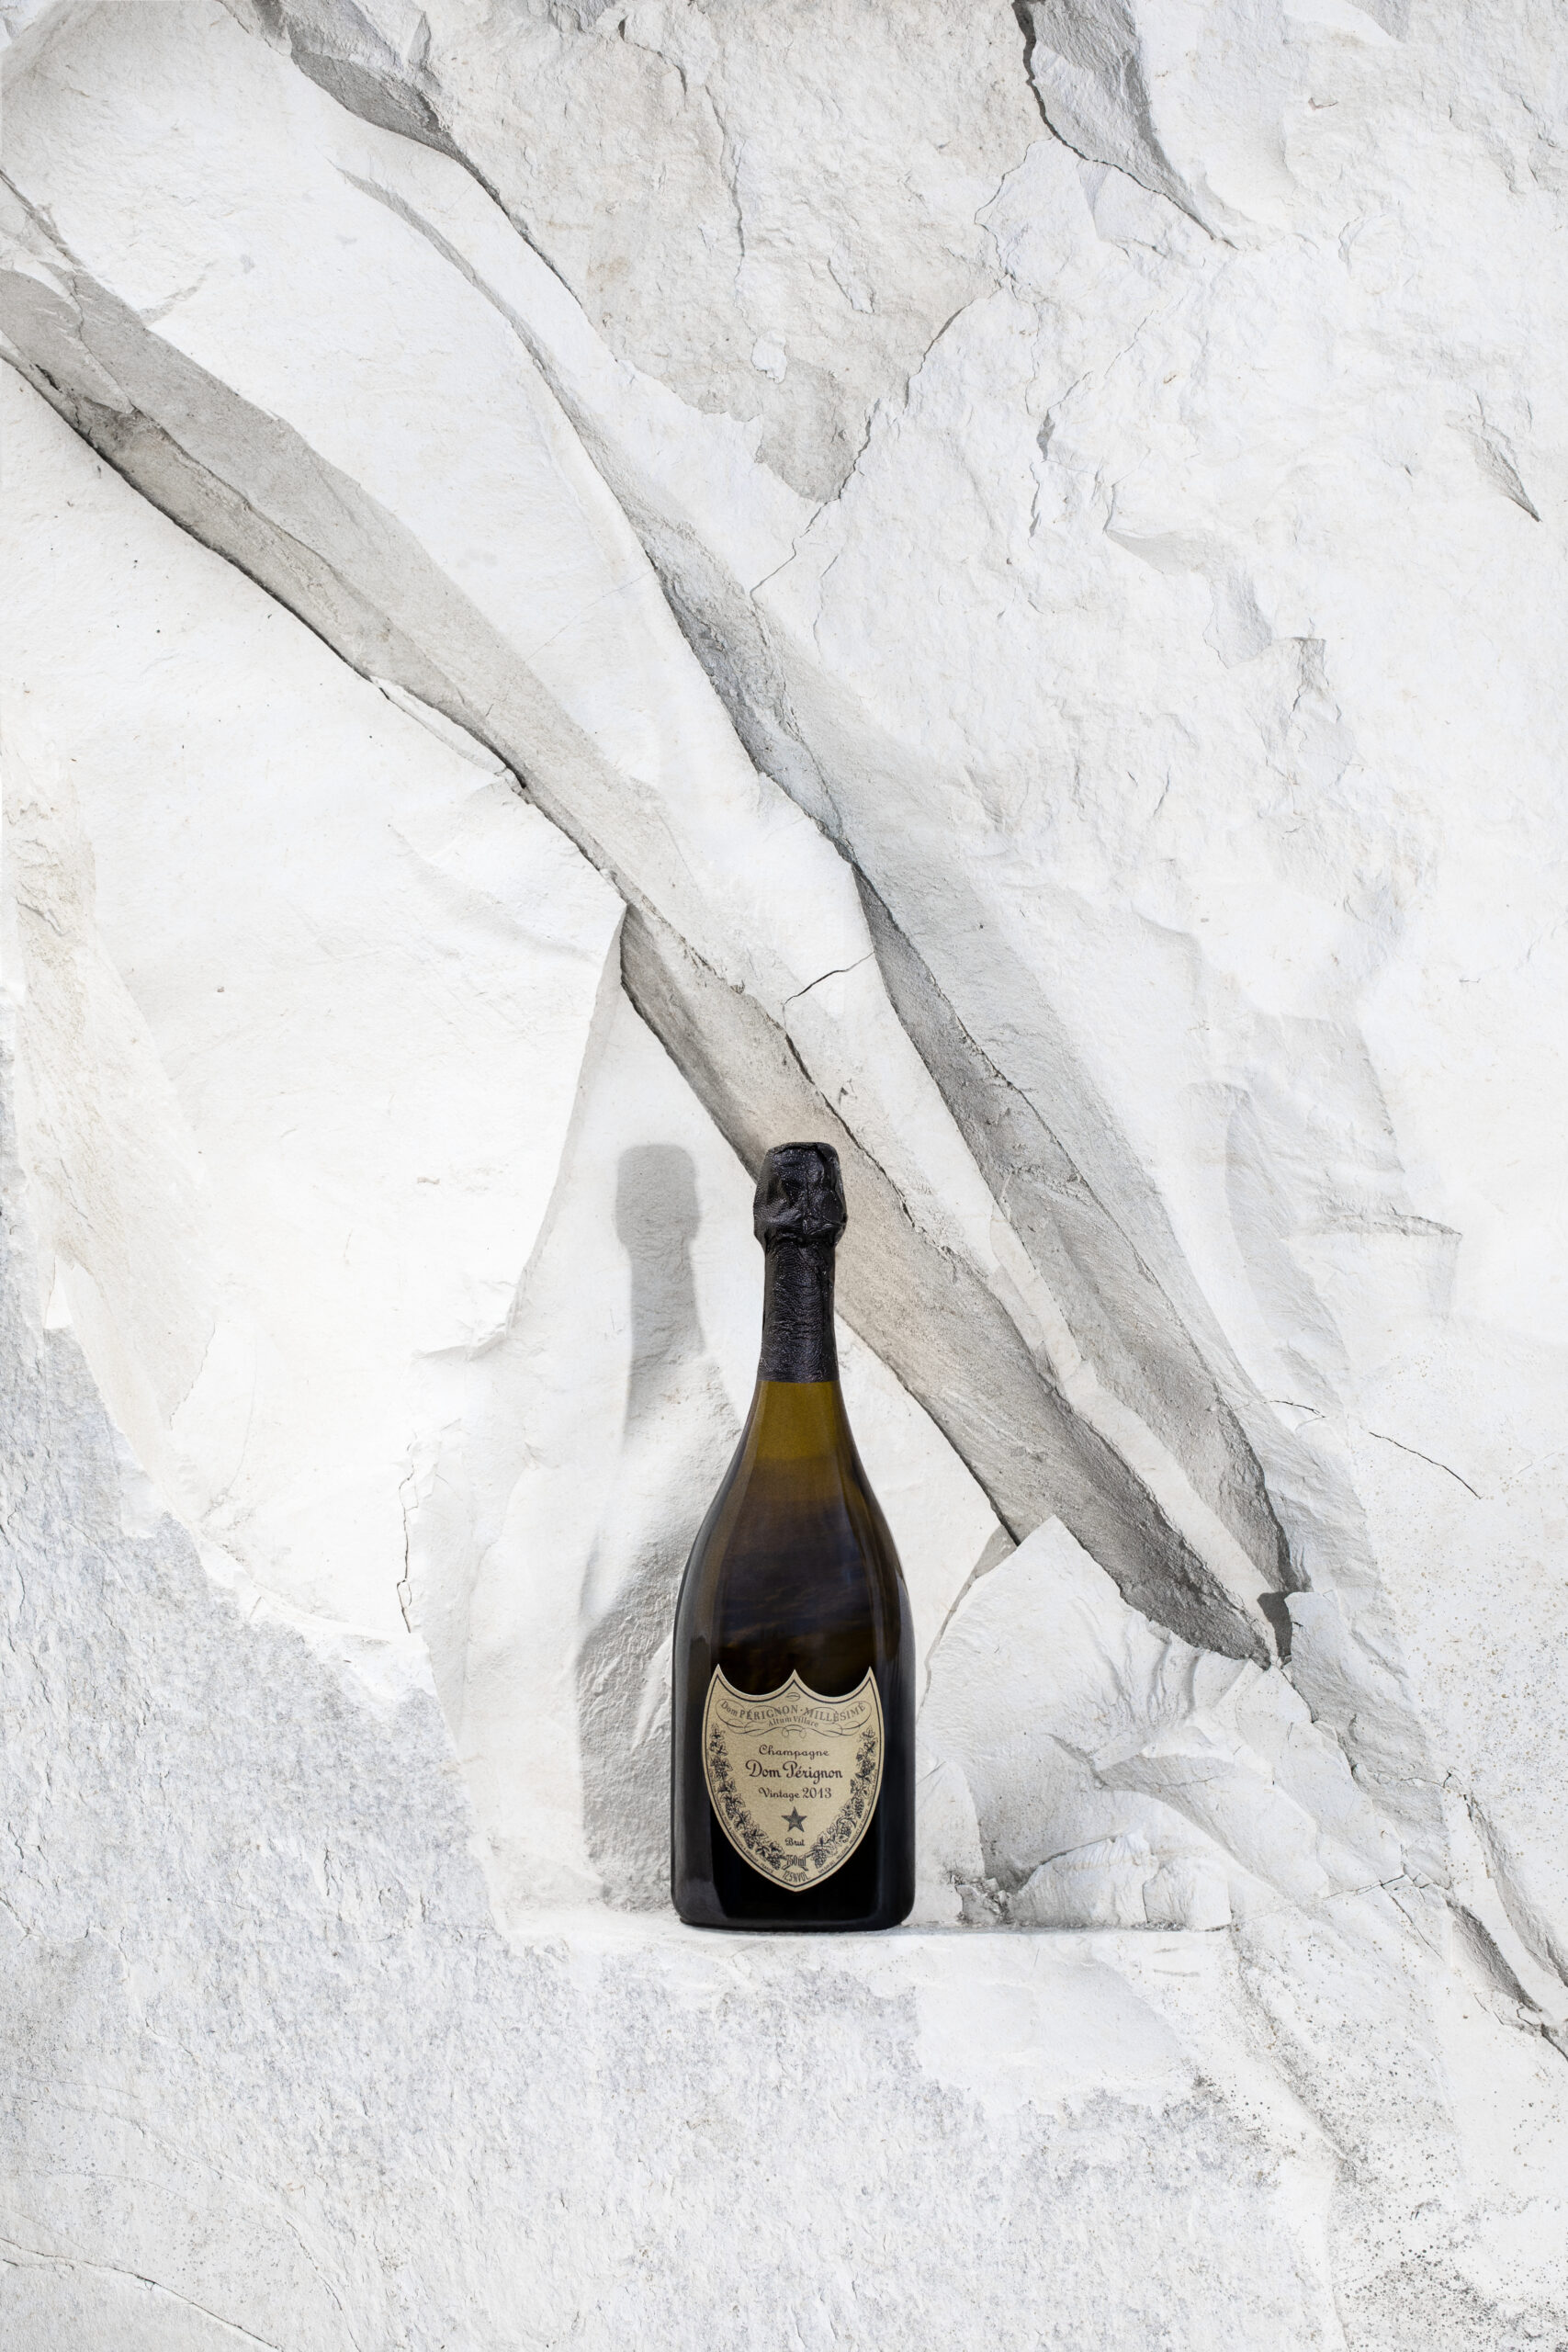 In 2013, Dom Pérignon Took Difficult a | NUVO Full Advantage Vintage of